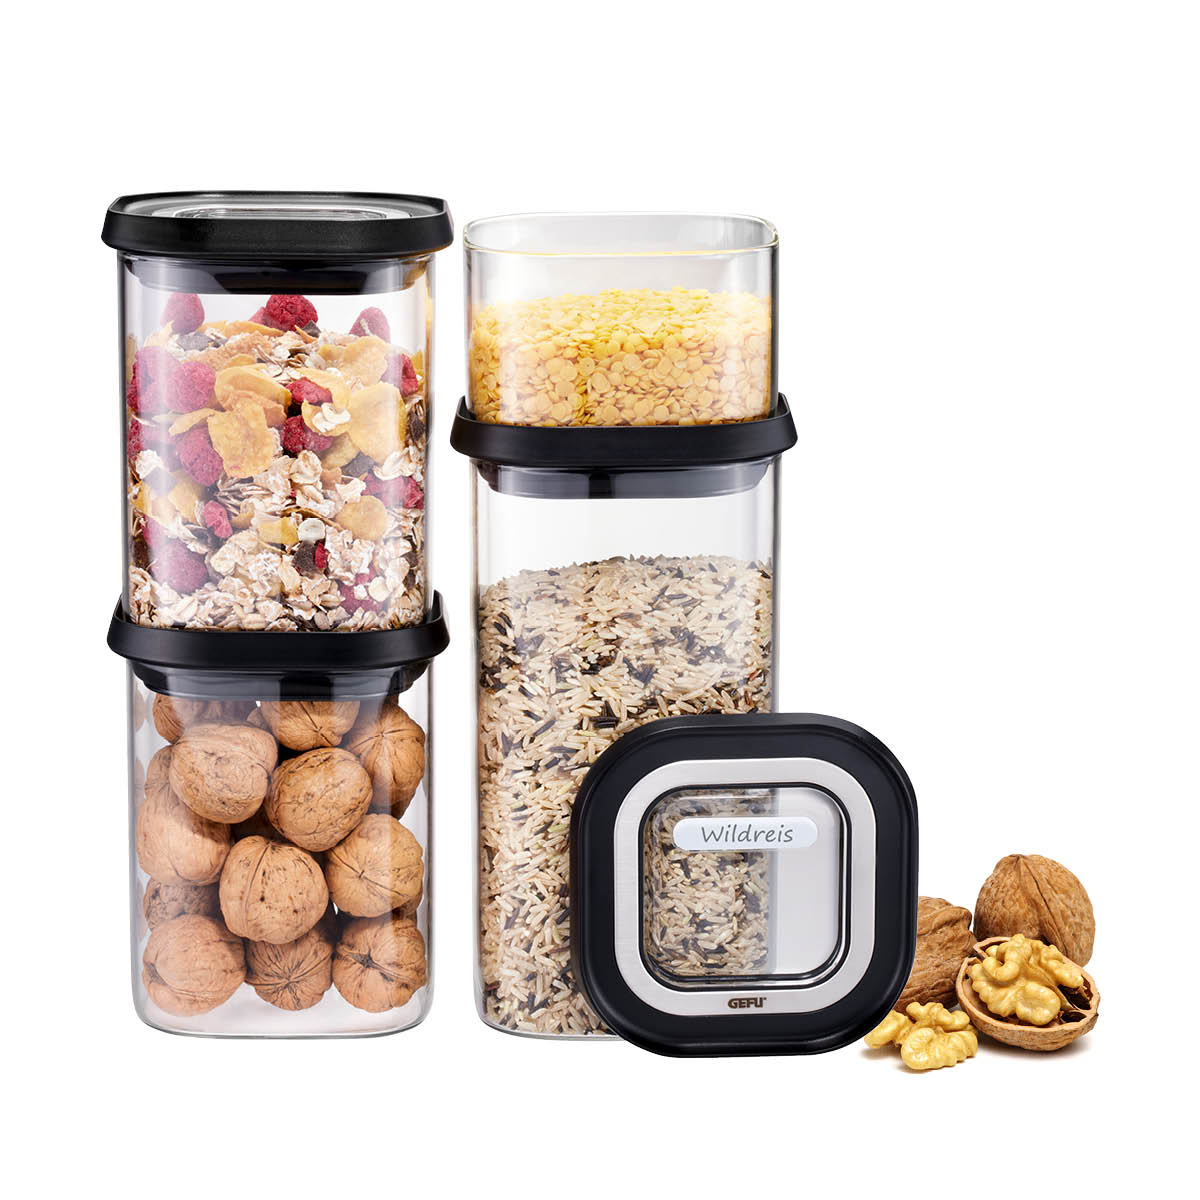 Food storage container set PANTRY, 4 pieces